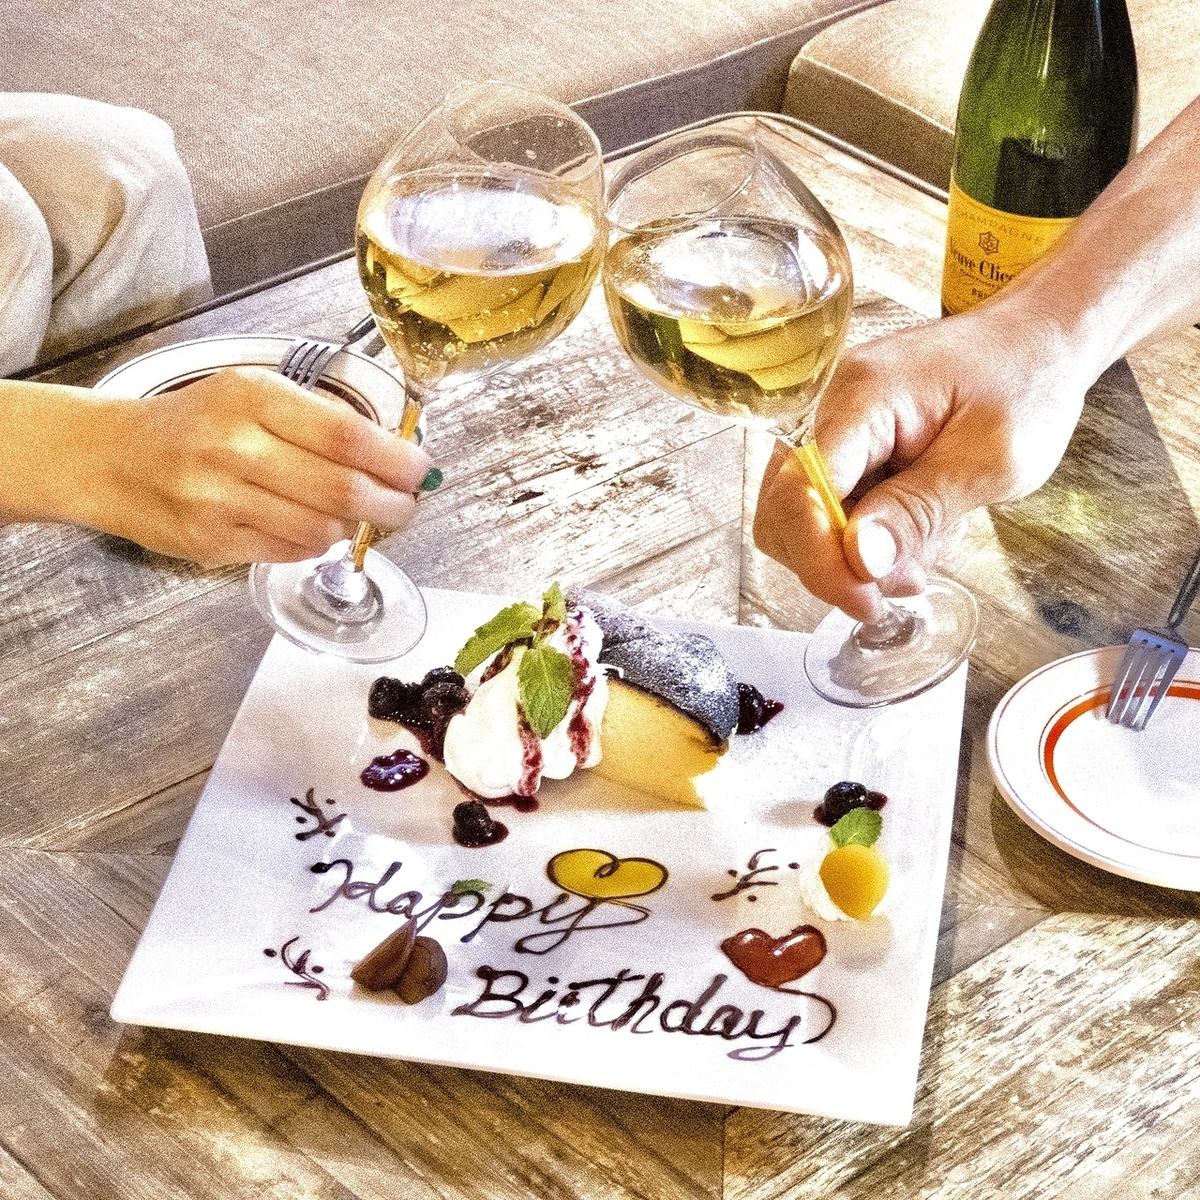 Perfect for celebrating your loved ones♪ We also have popular table art available!